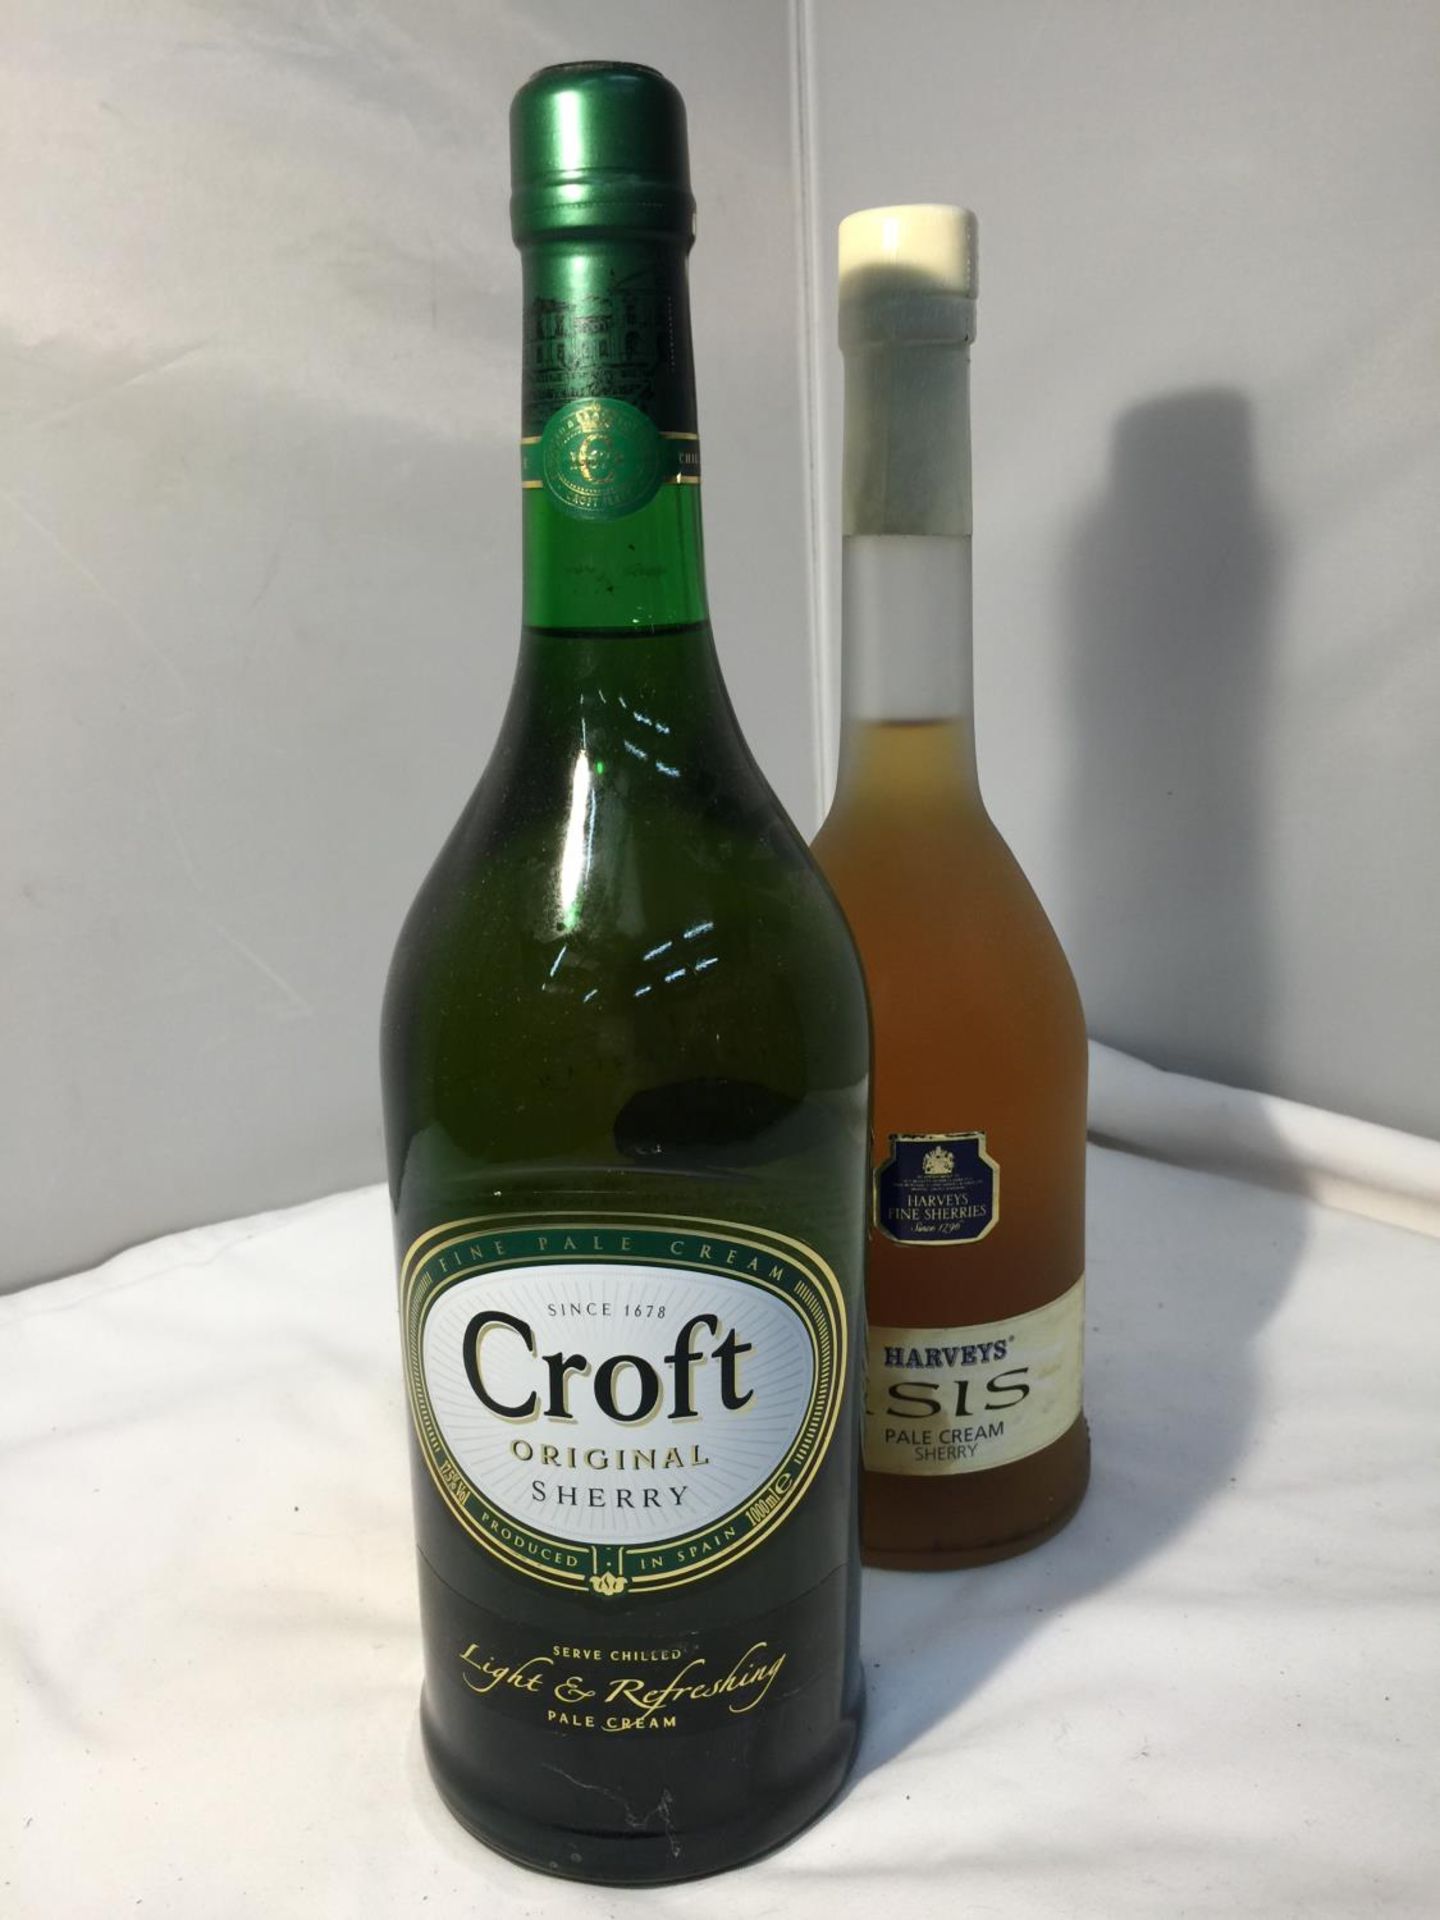 A 75CL BOTTLE OF HARVEYS ISIS PALE CREAM SHERRY 17.5% VOL AND A SECOND 1L BOTTLE OF CROFT ORIGINAL